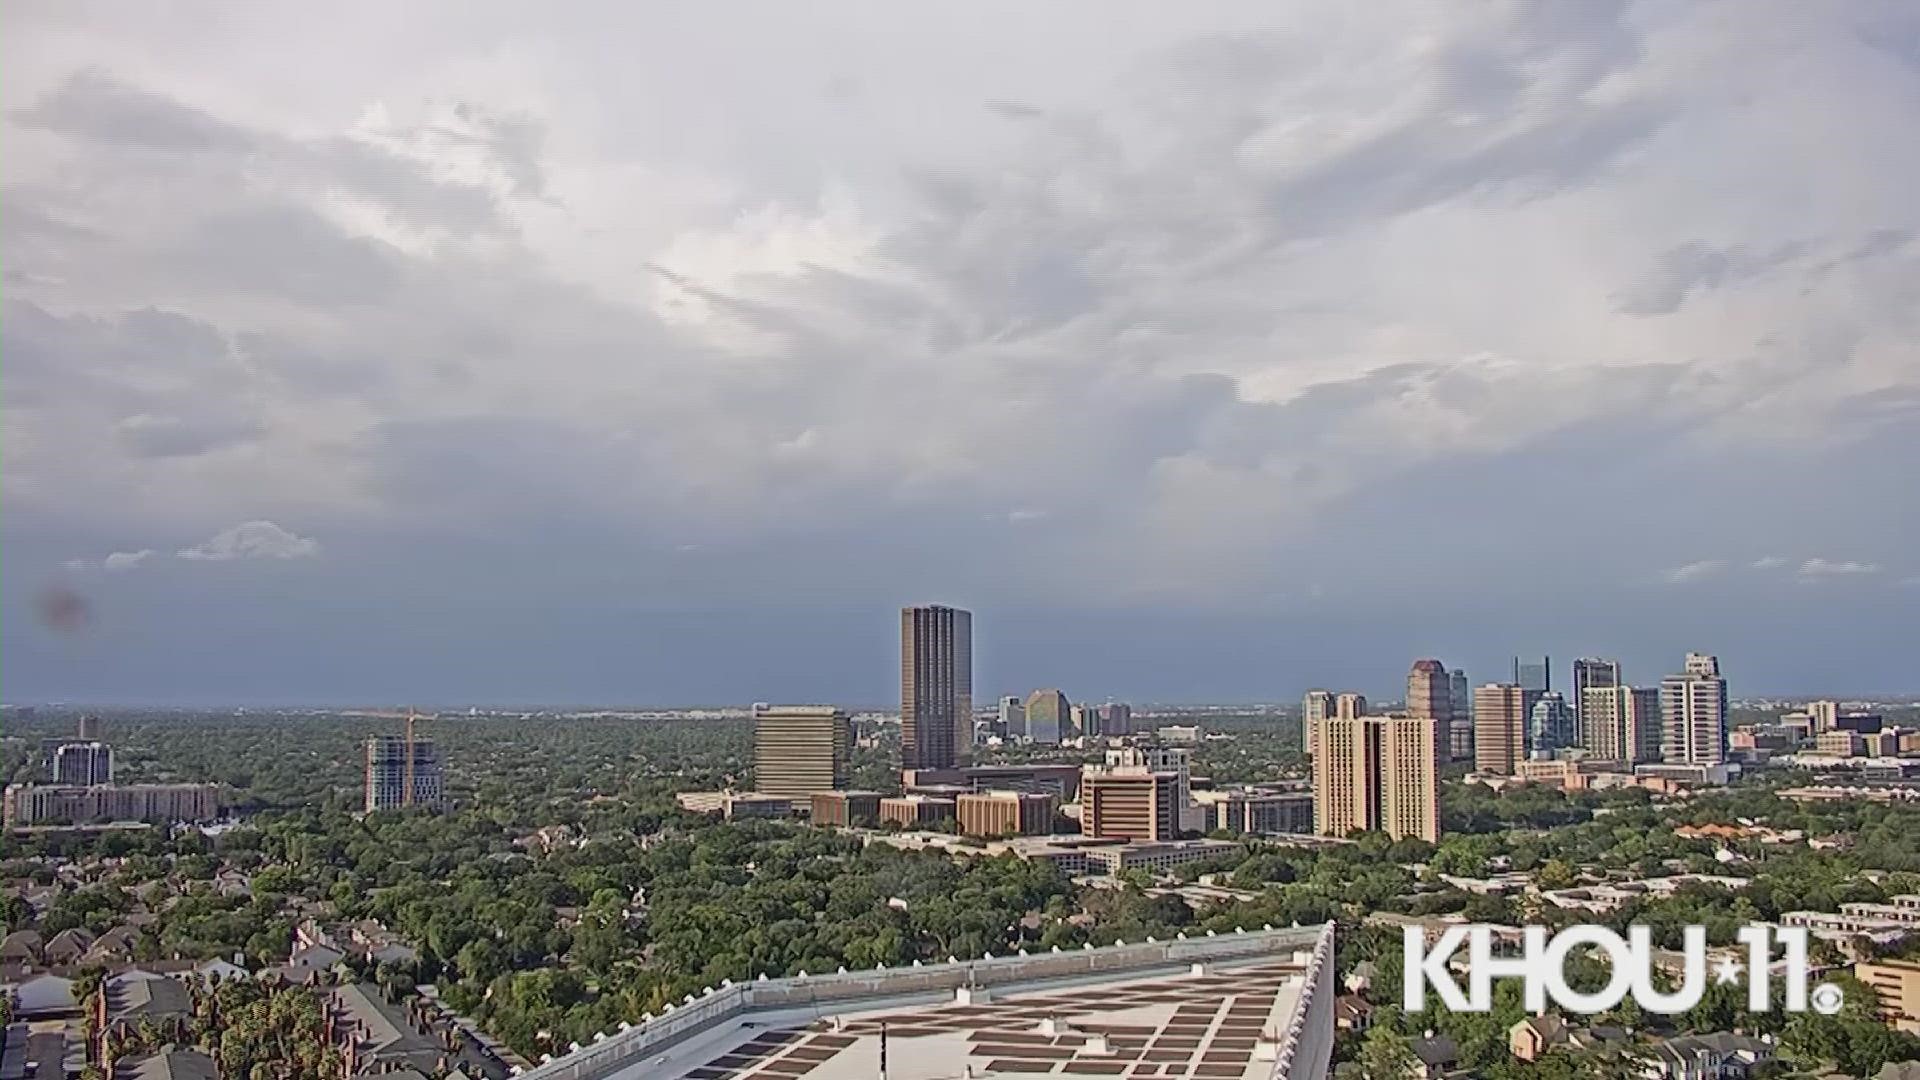 This timelapse video shows strong thunderstorms rolling in from the KHOU 11 News studios on Westheimer on Wednesday, Aug. 10, 2022.